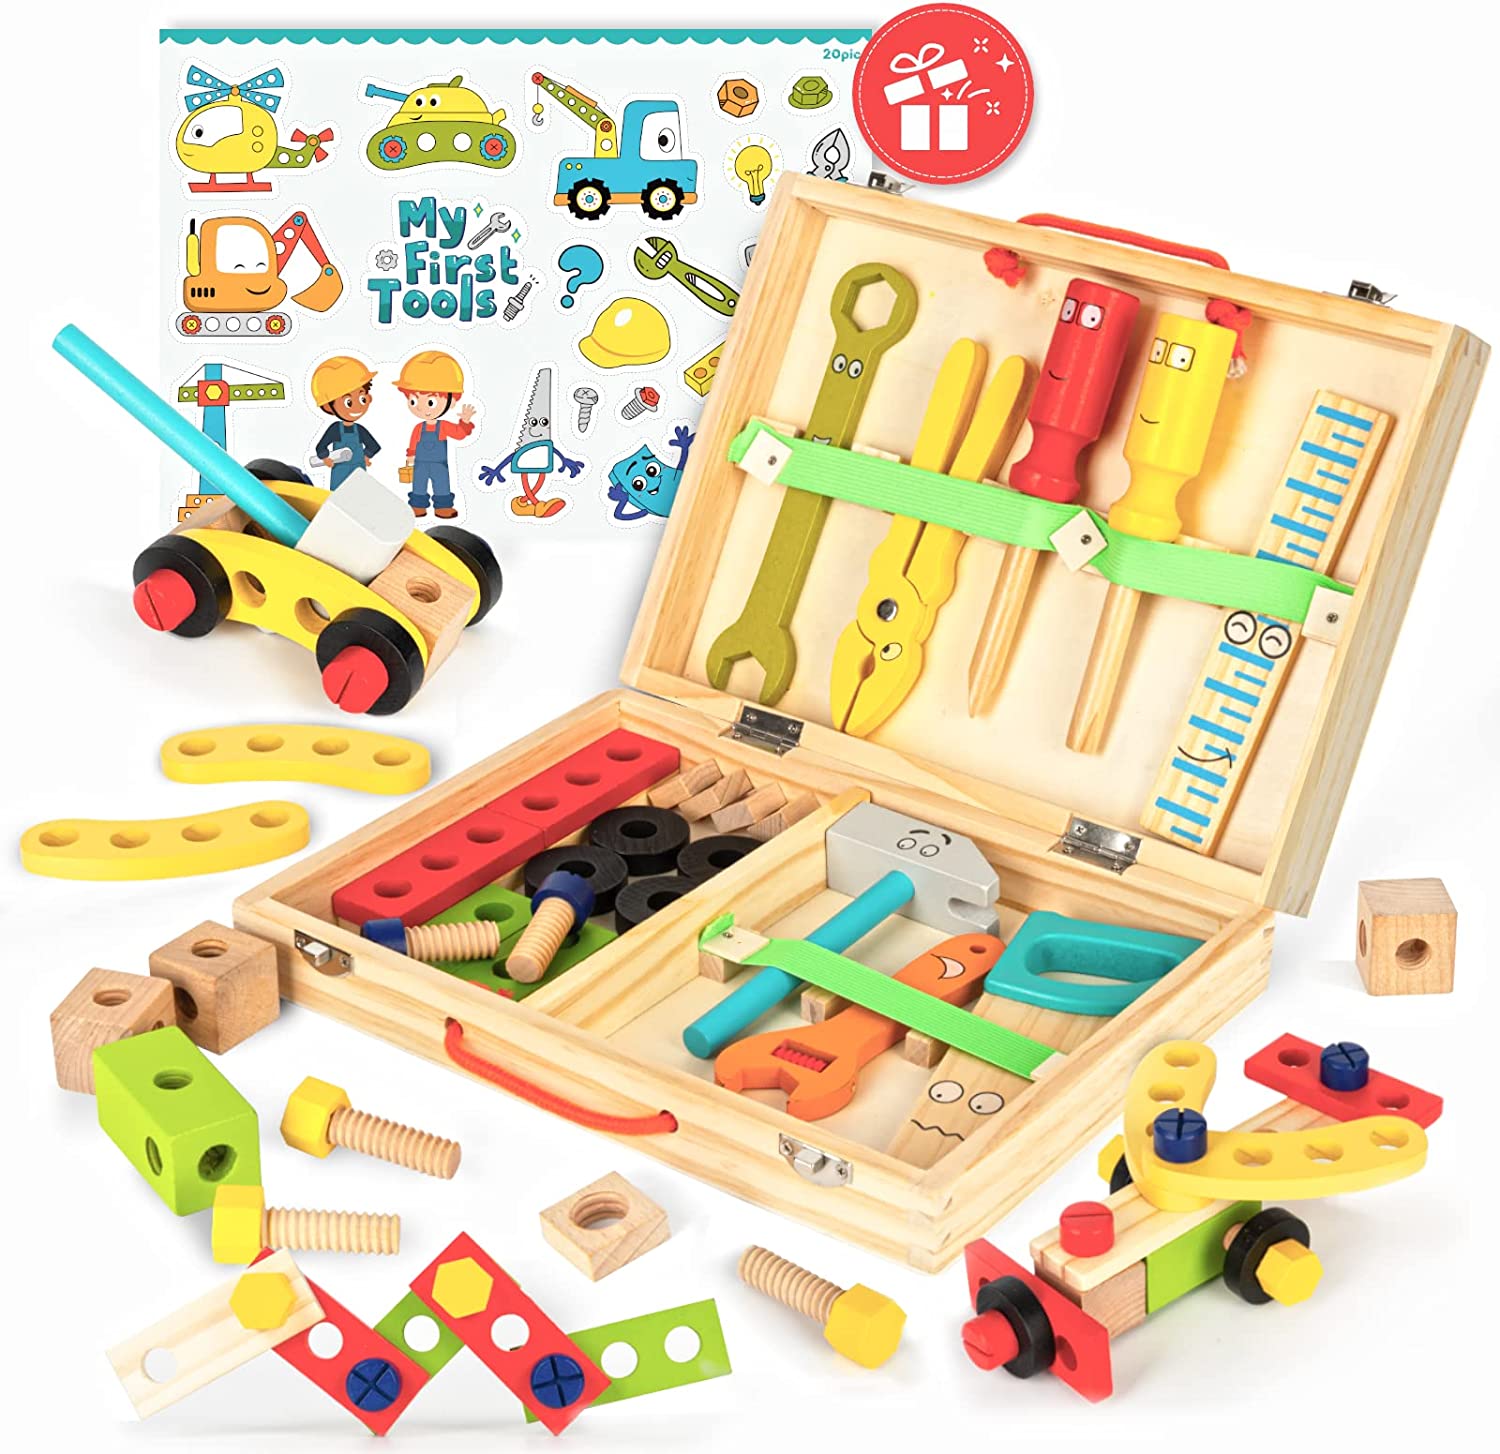 Labebe - Wooden Kids Tool Set – 36 PCS Tool Kit Box with Stickers